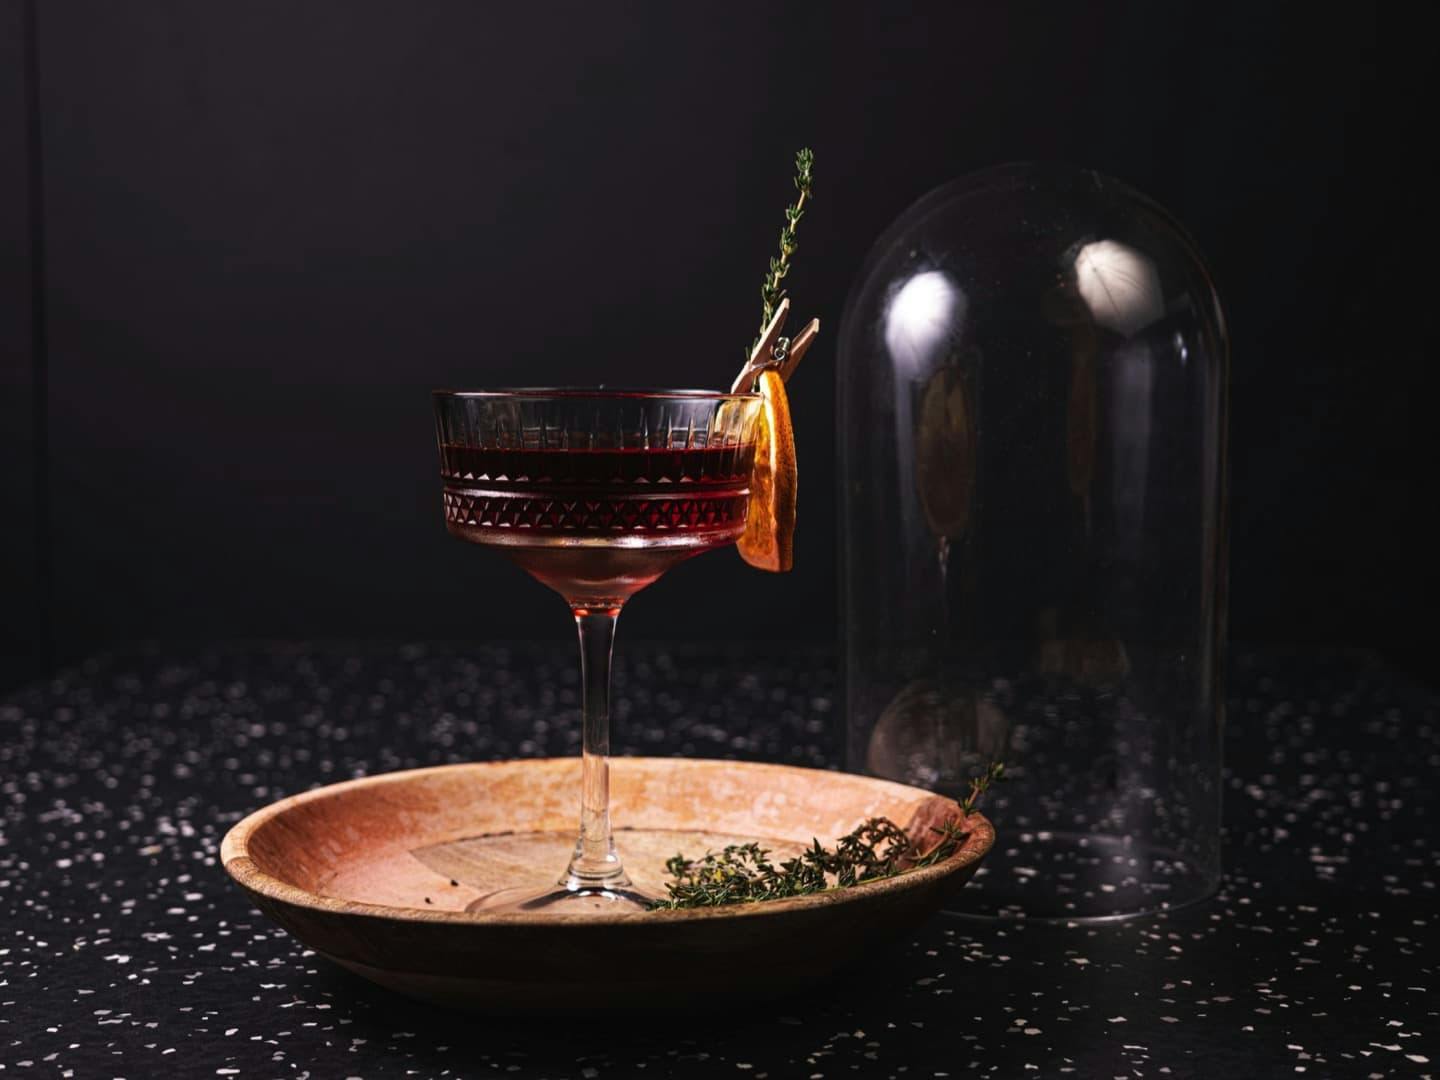 <p>The Rendez-vous for smoky and lost poets</p>
<p>Base: Rye whisky, Cognac, Martini Rubino, absinth bitter</p>